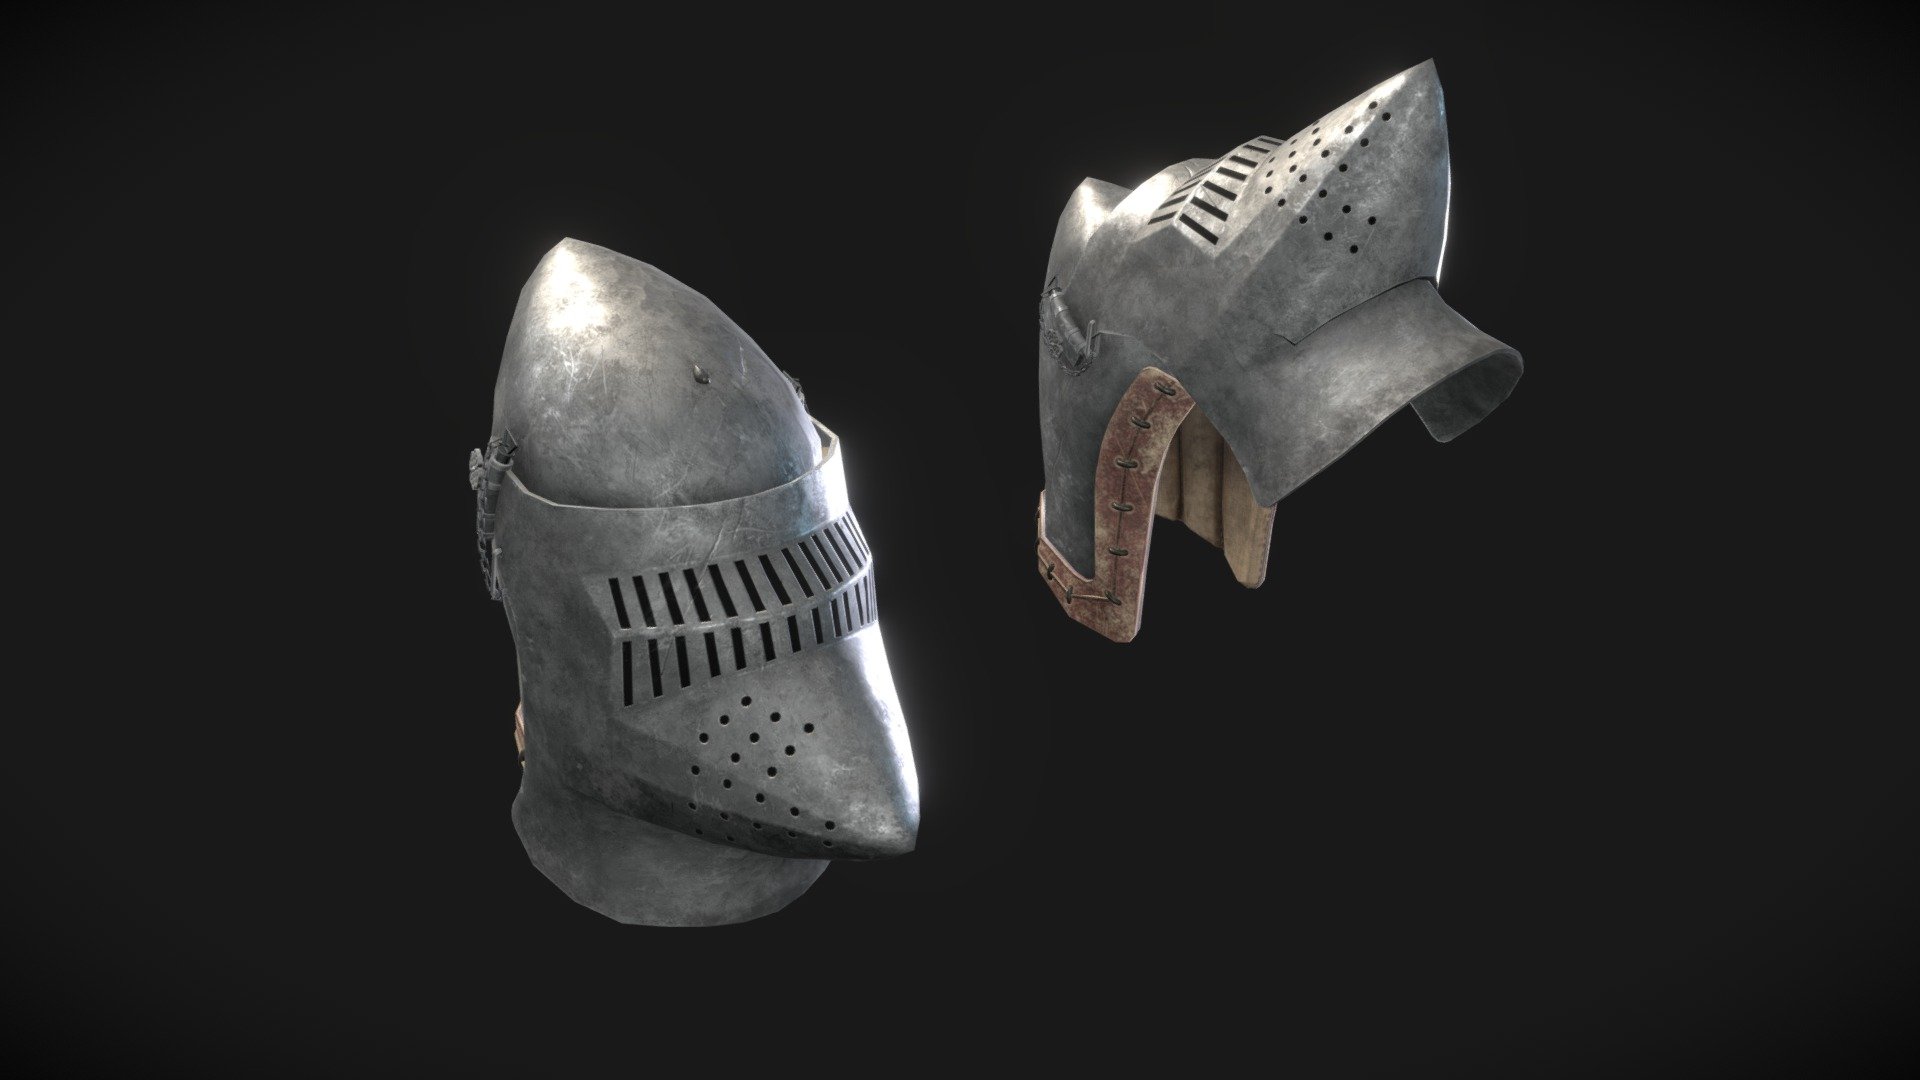 Bascinet helmet, made for a game company application test.

The bascinet was a late 11th century - 12th century armor piece designed to deflect blows from swords and arrows. The visor was an addition made in the early 12th century.

Modeled in Maya, textured in Substance Painter - Bascinet - 3D model by Jason vonGermeten (@jasonvongermeten) 3d model